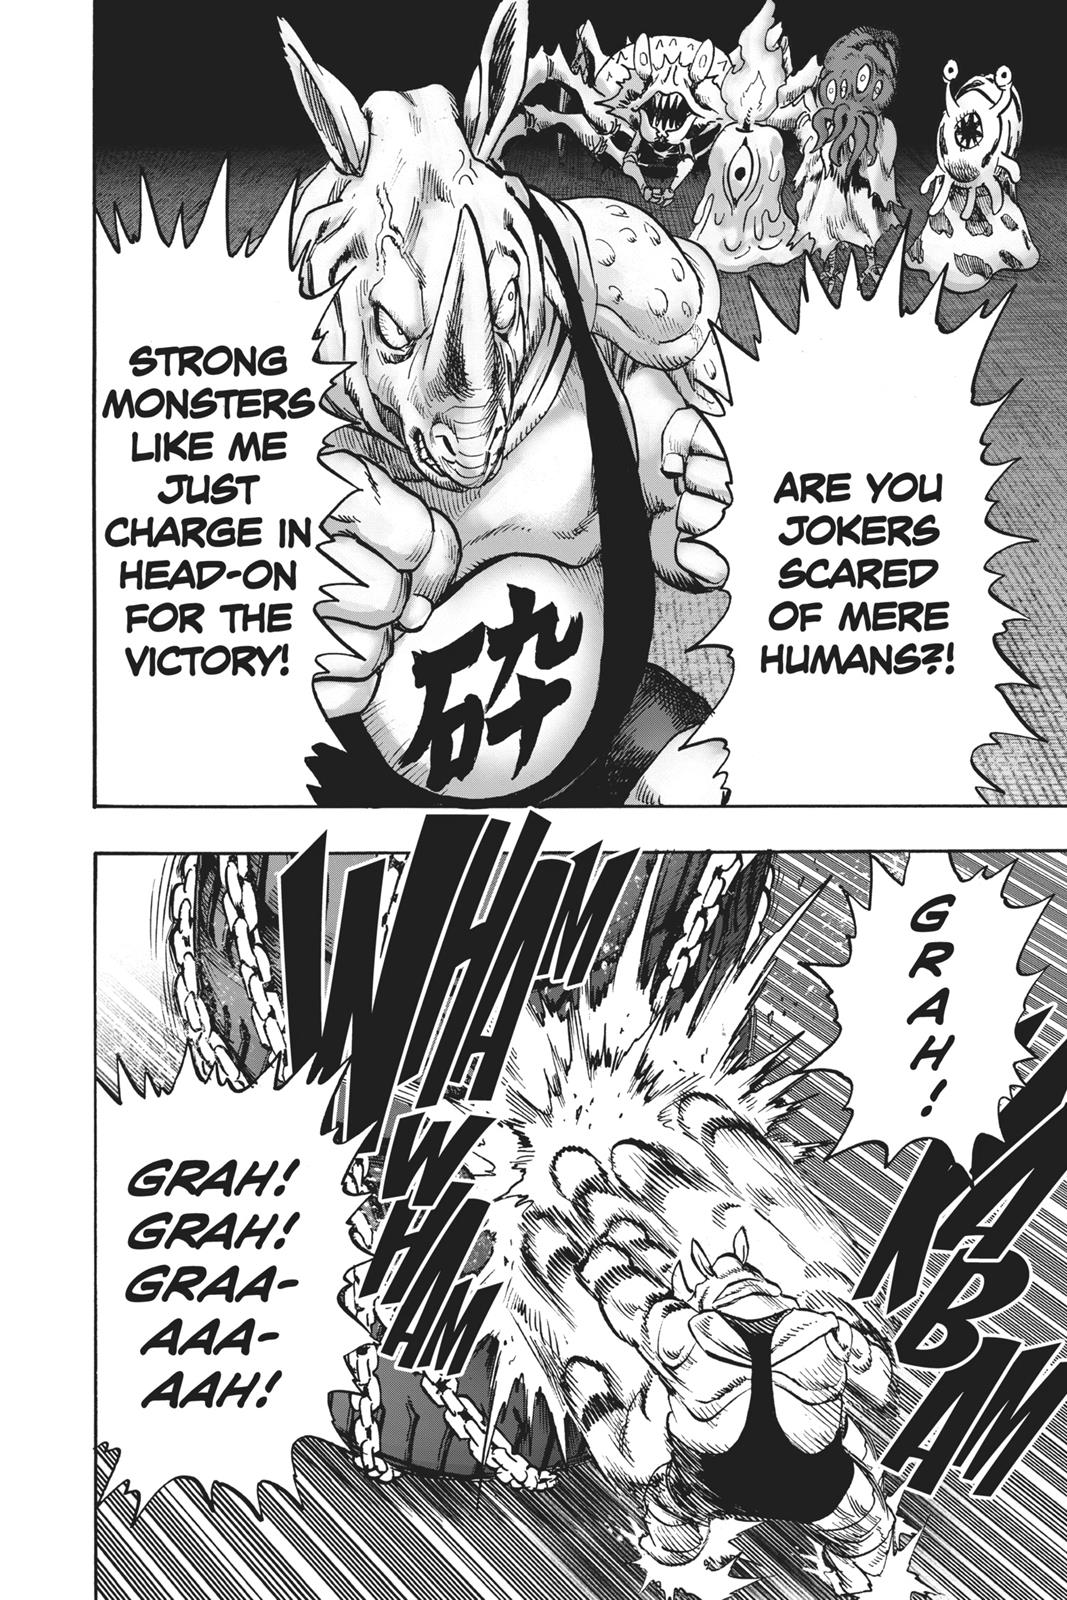 One-Punch Man, Punch 90 image 34